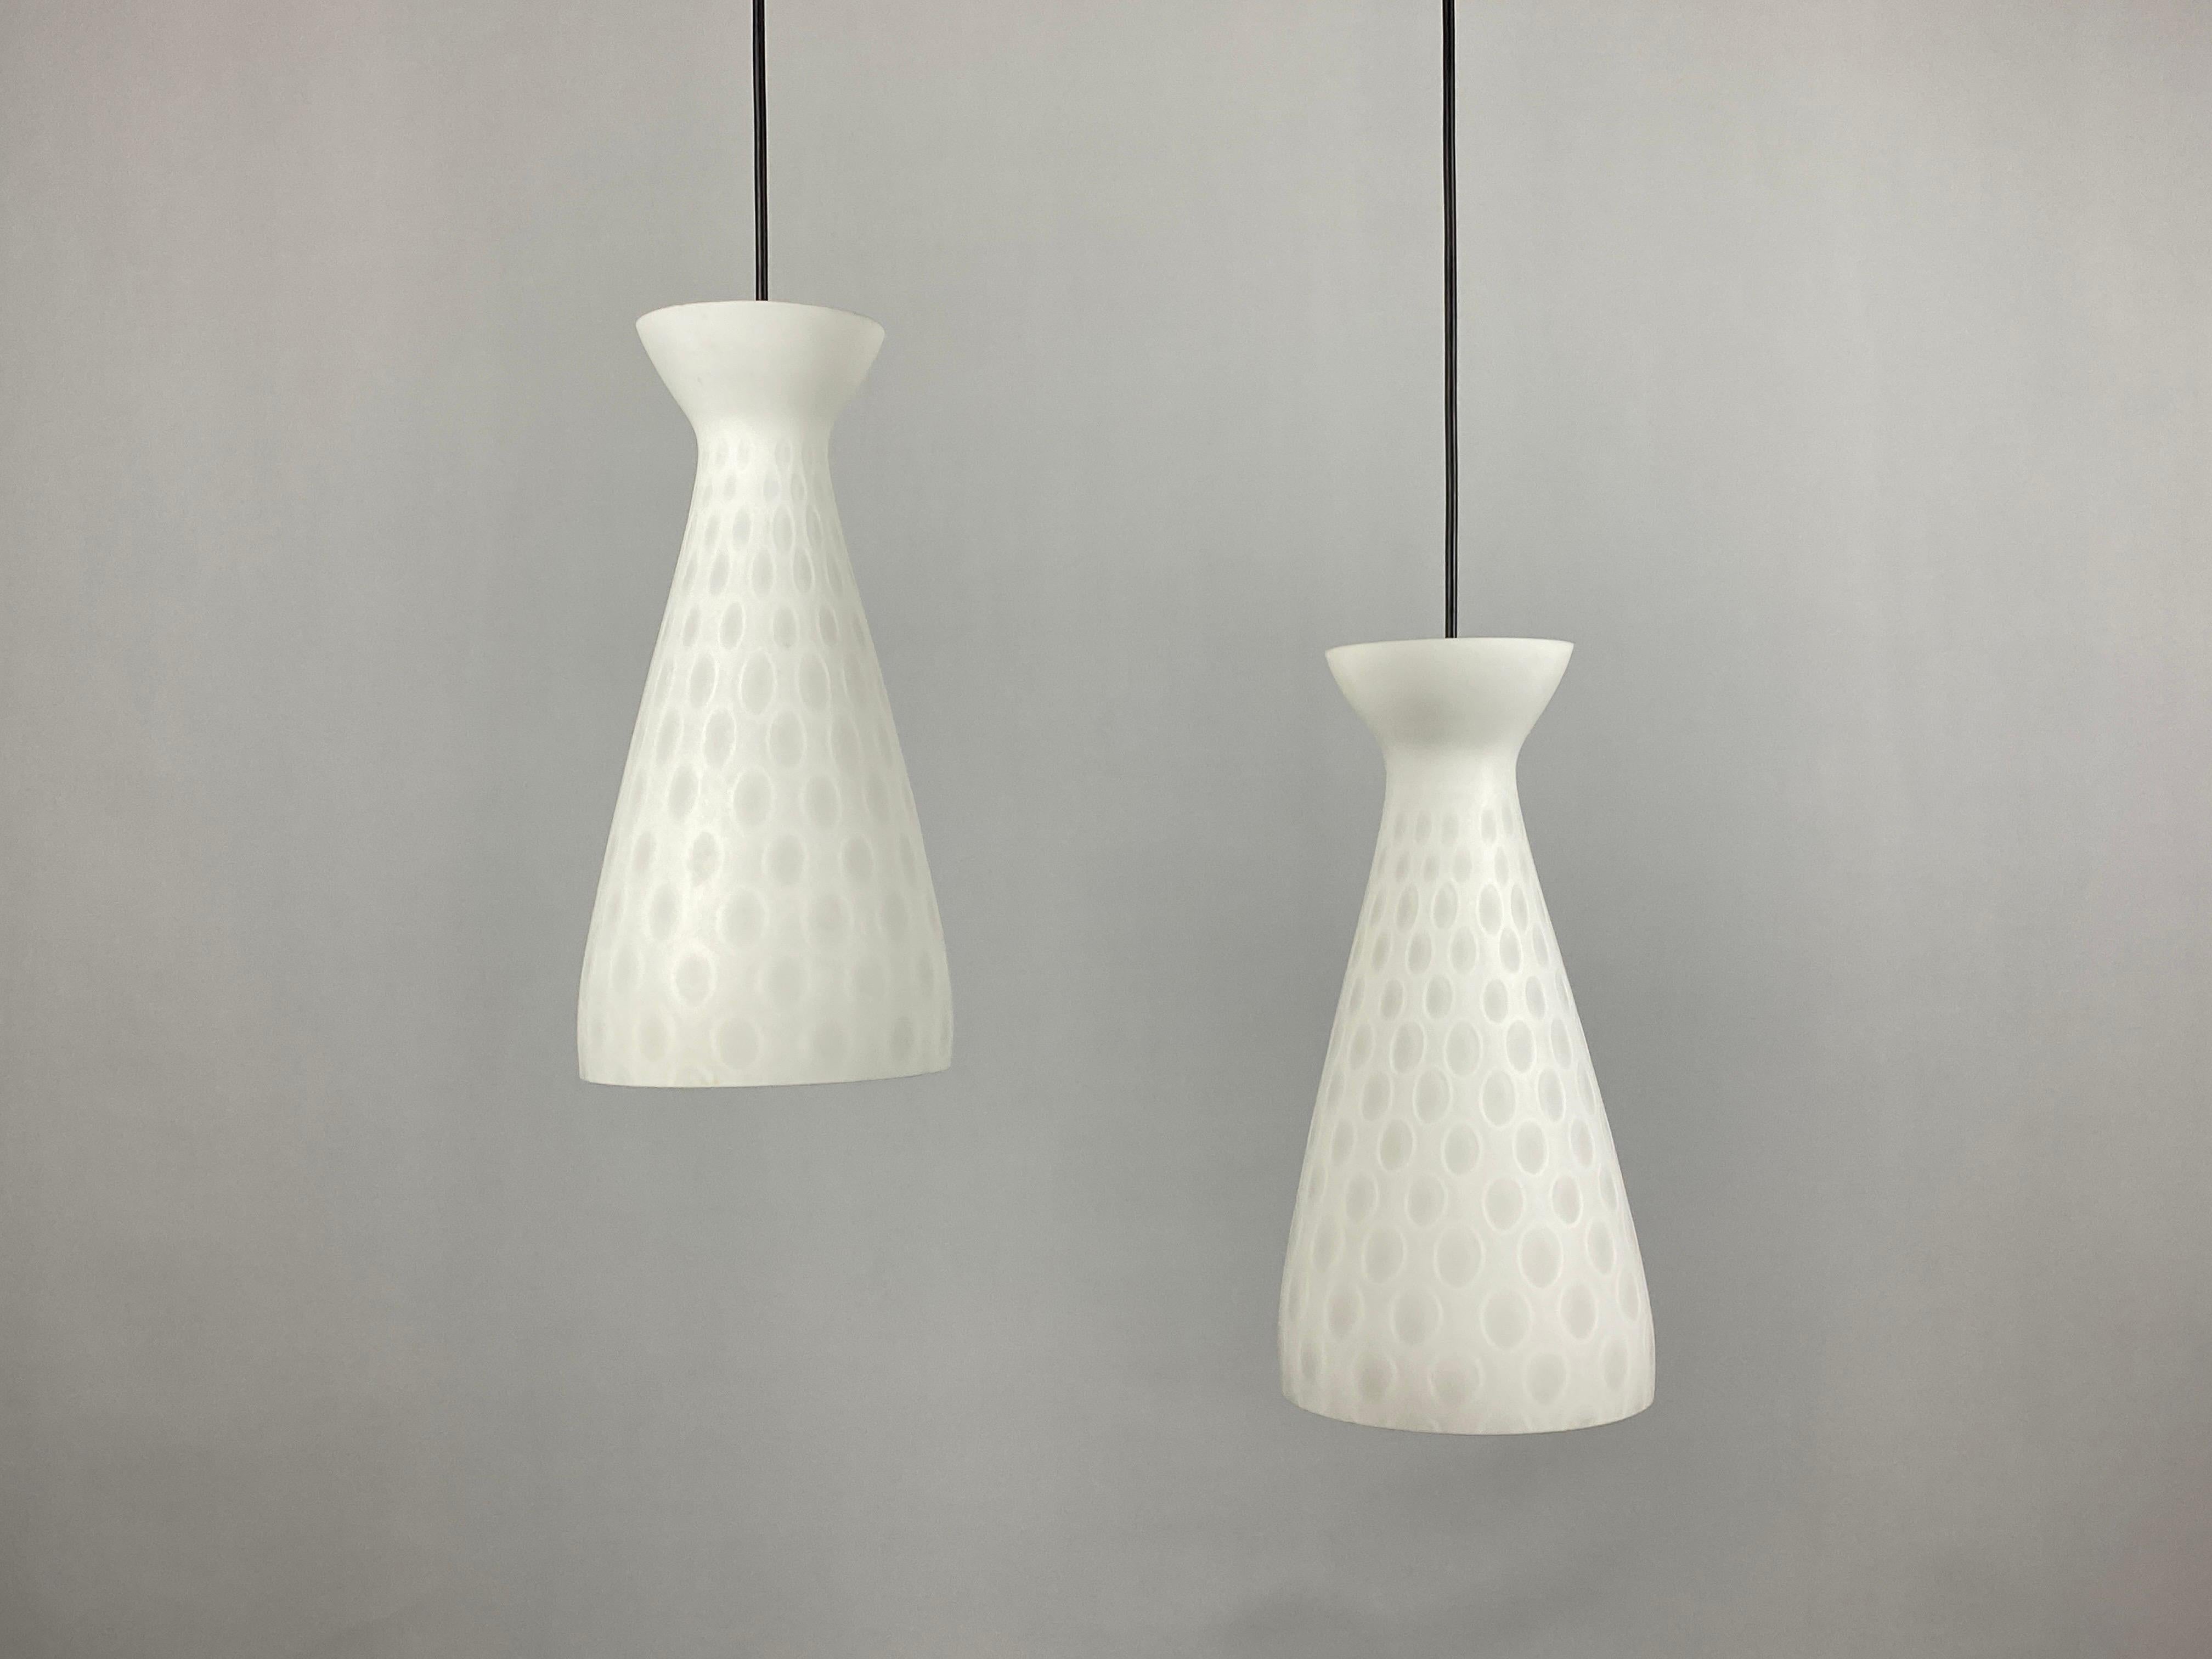 A pair of milky white glass pendant lights designed by Aloys Gangkofner for the high-quality glass factory Peill and Putzler from the 1960s. This model is called Ibiza.

Has a very interesting pattern and diabolo like shape. I have a mushroom table